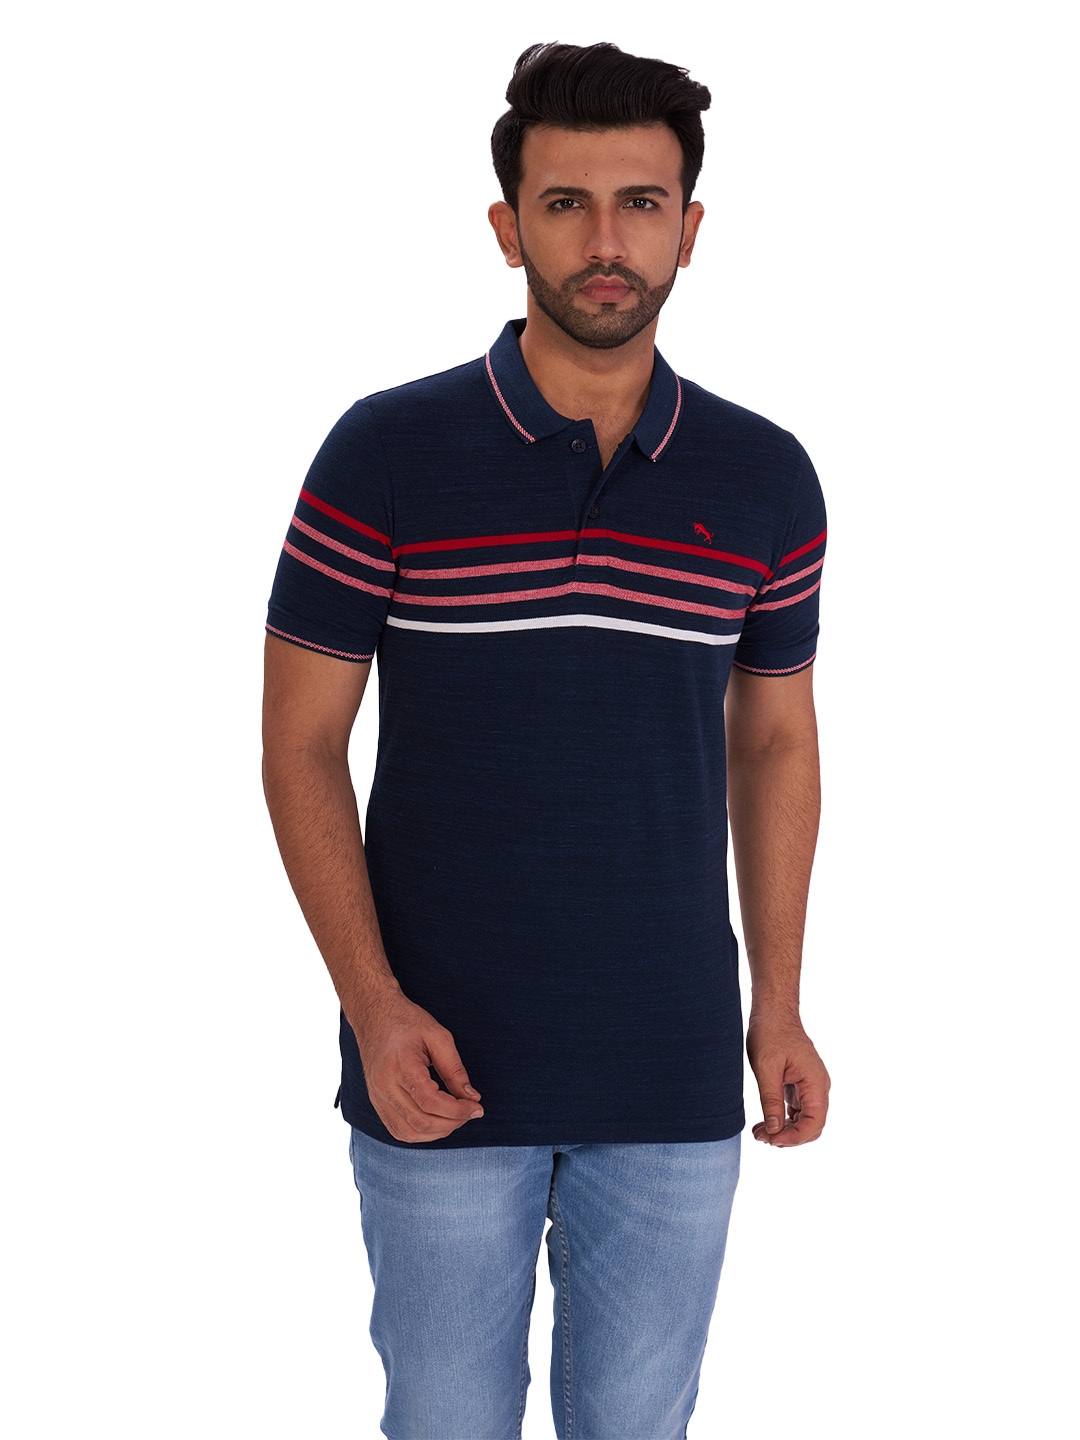 D'cot by Donear | D'cot by Donear Mens Multi Cotton T-Shirts